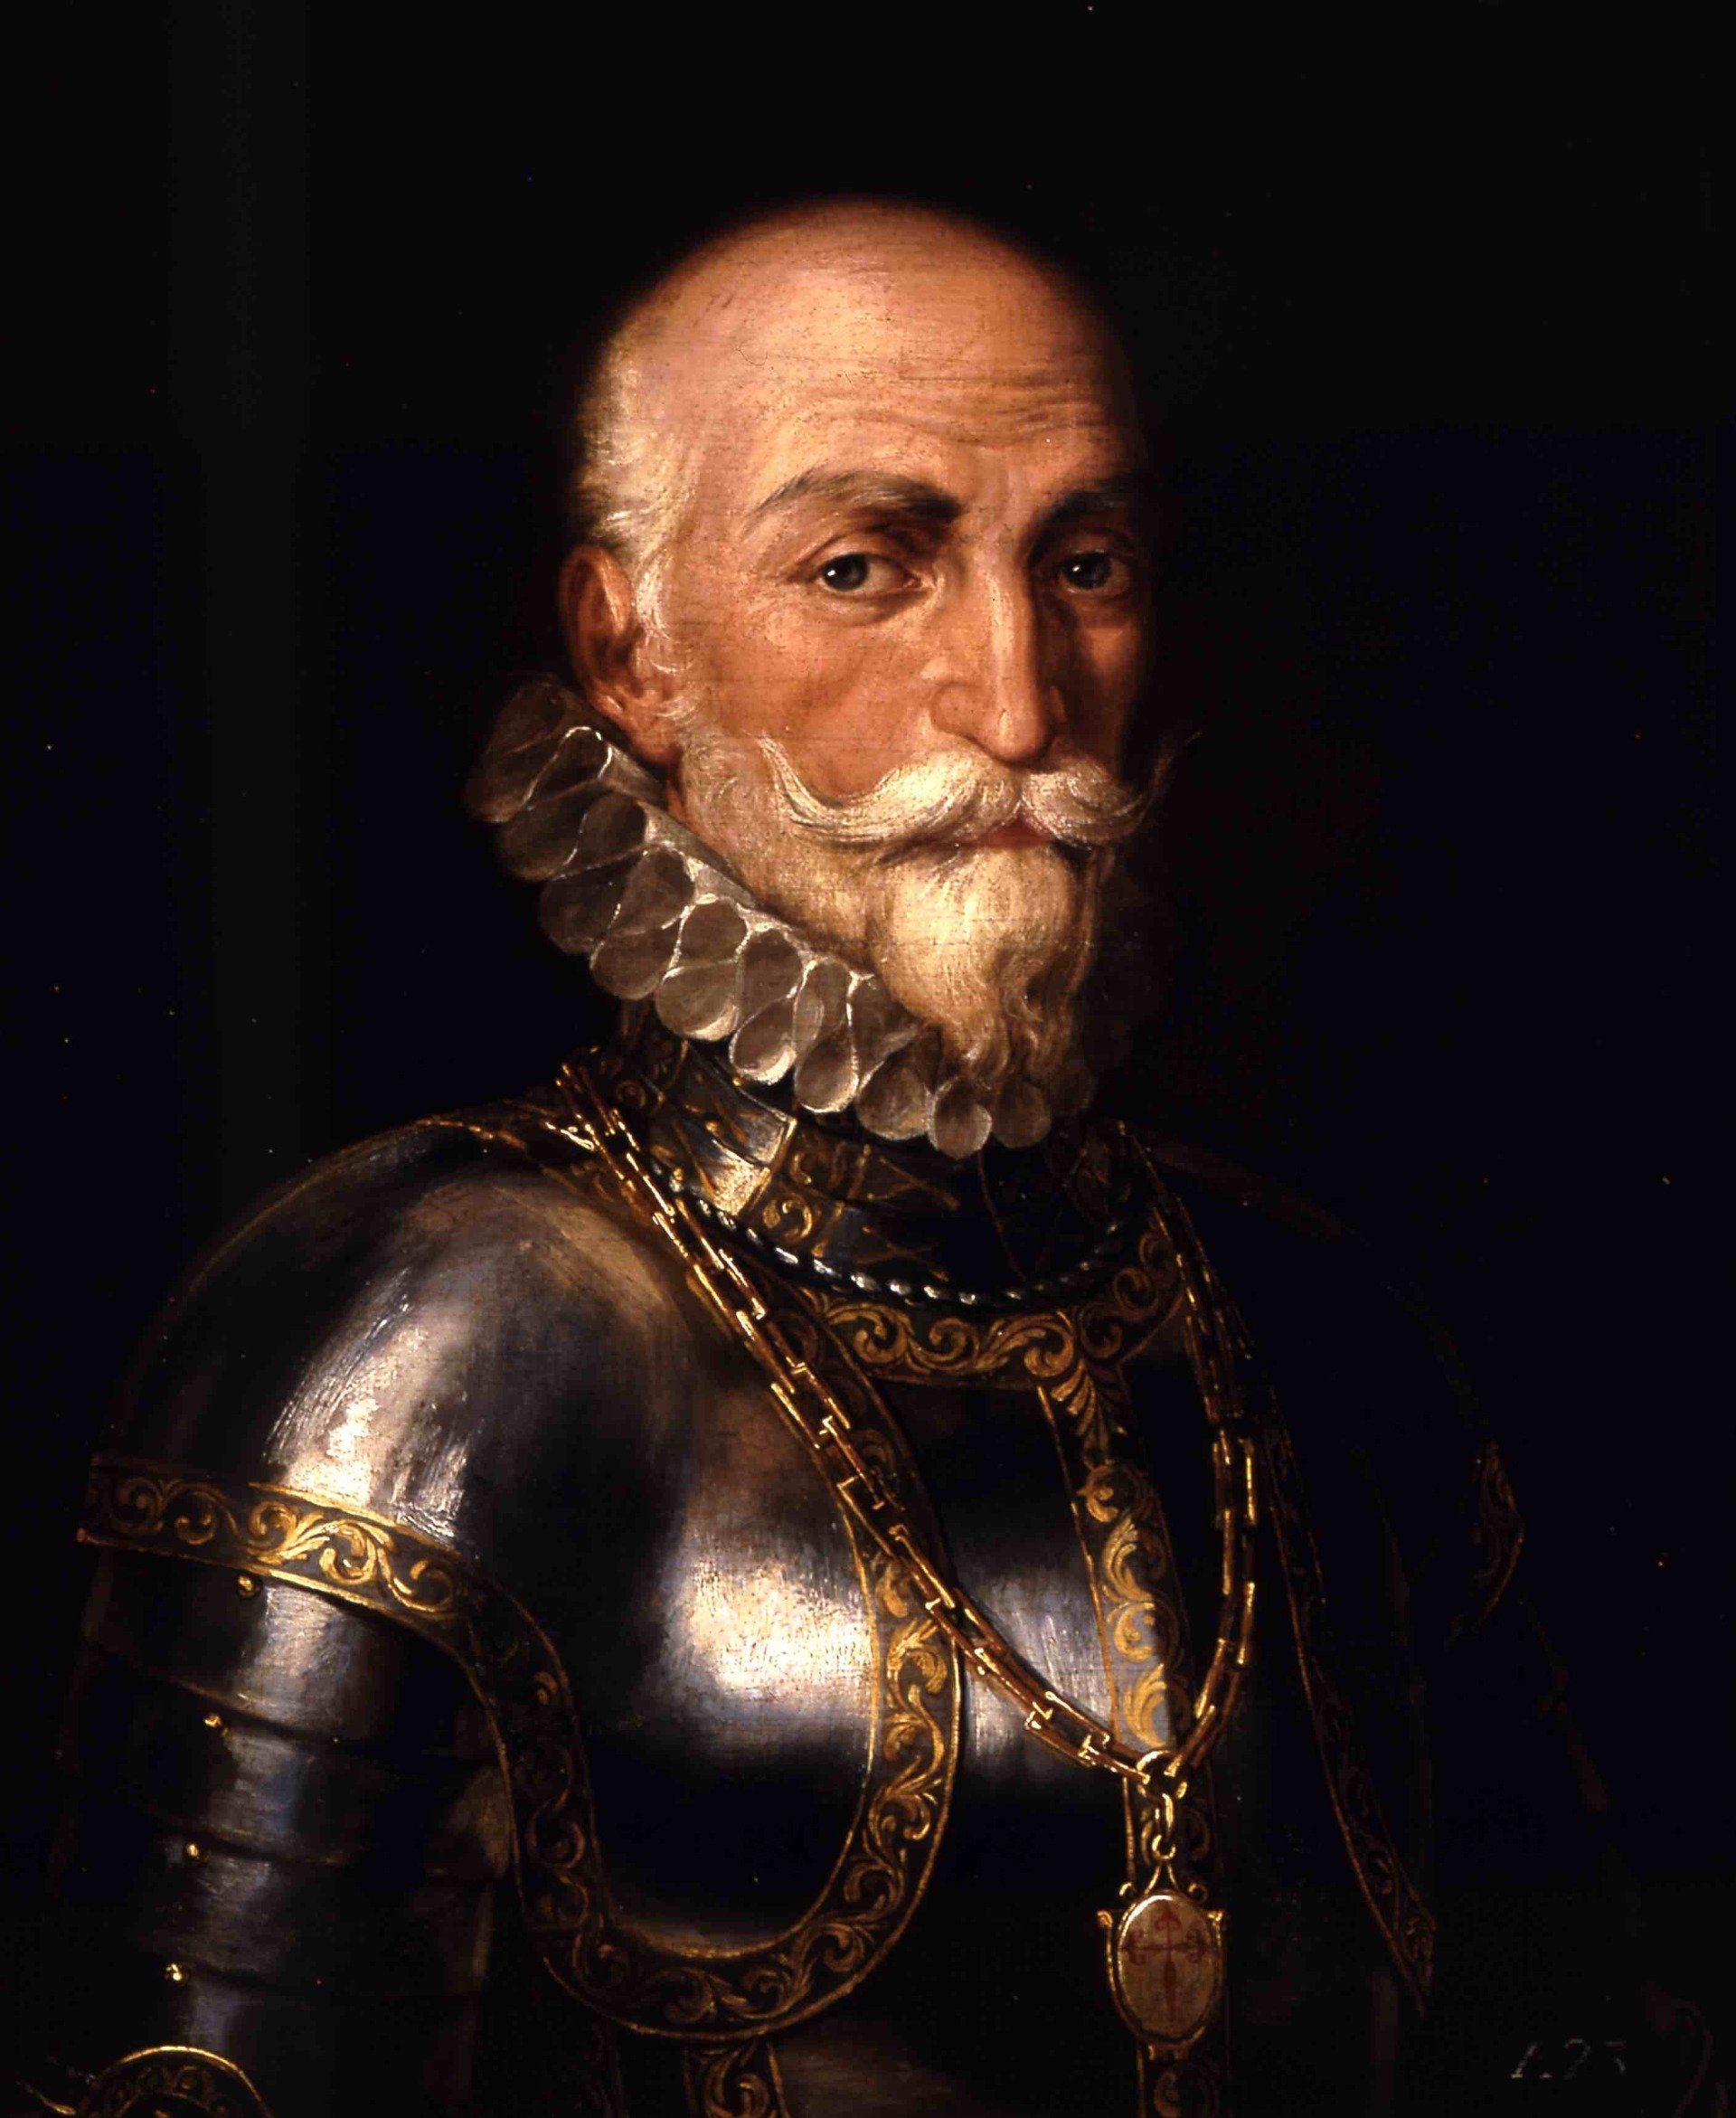 'Don Alvaro de Bazan' painting exhibited at the Naval Museum in Madrid, Spain. Photo: Courtesy of the Naval Museum in Madrid